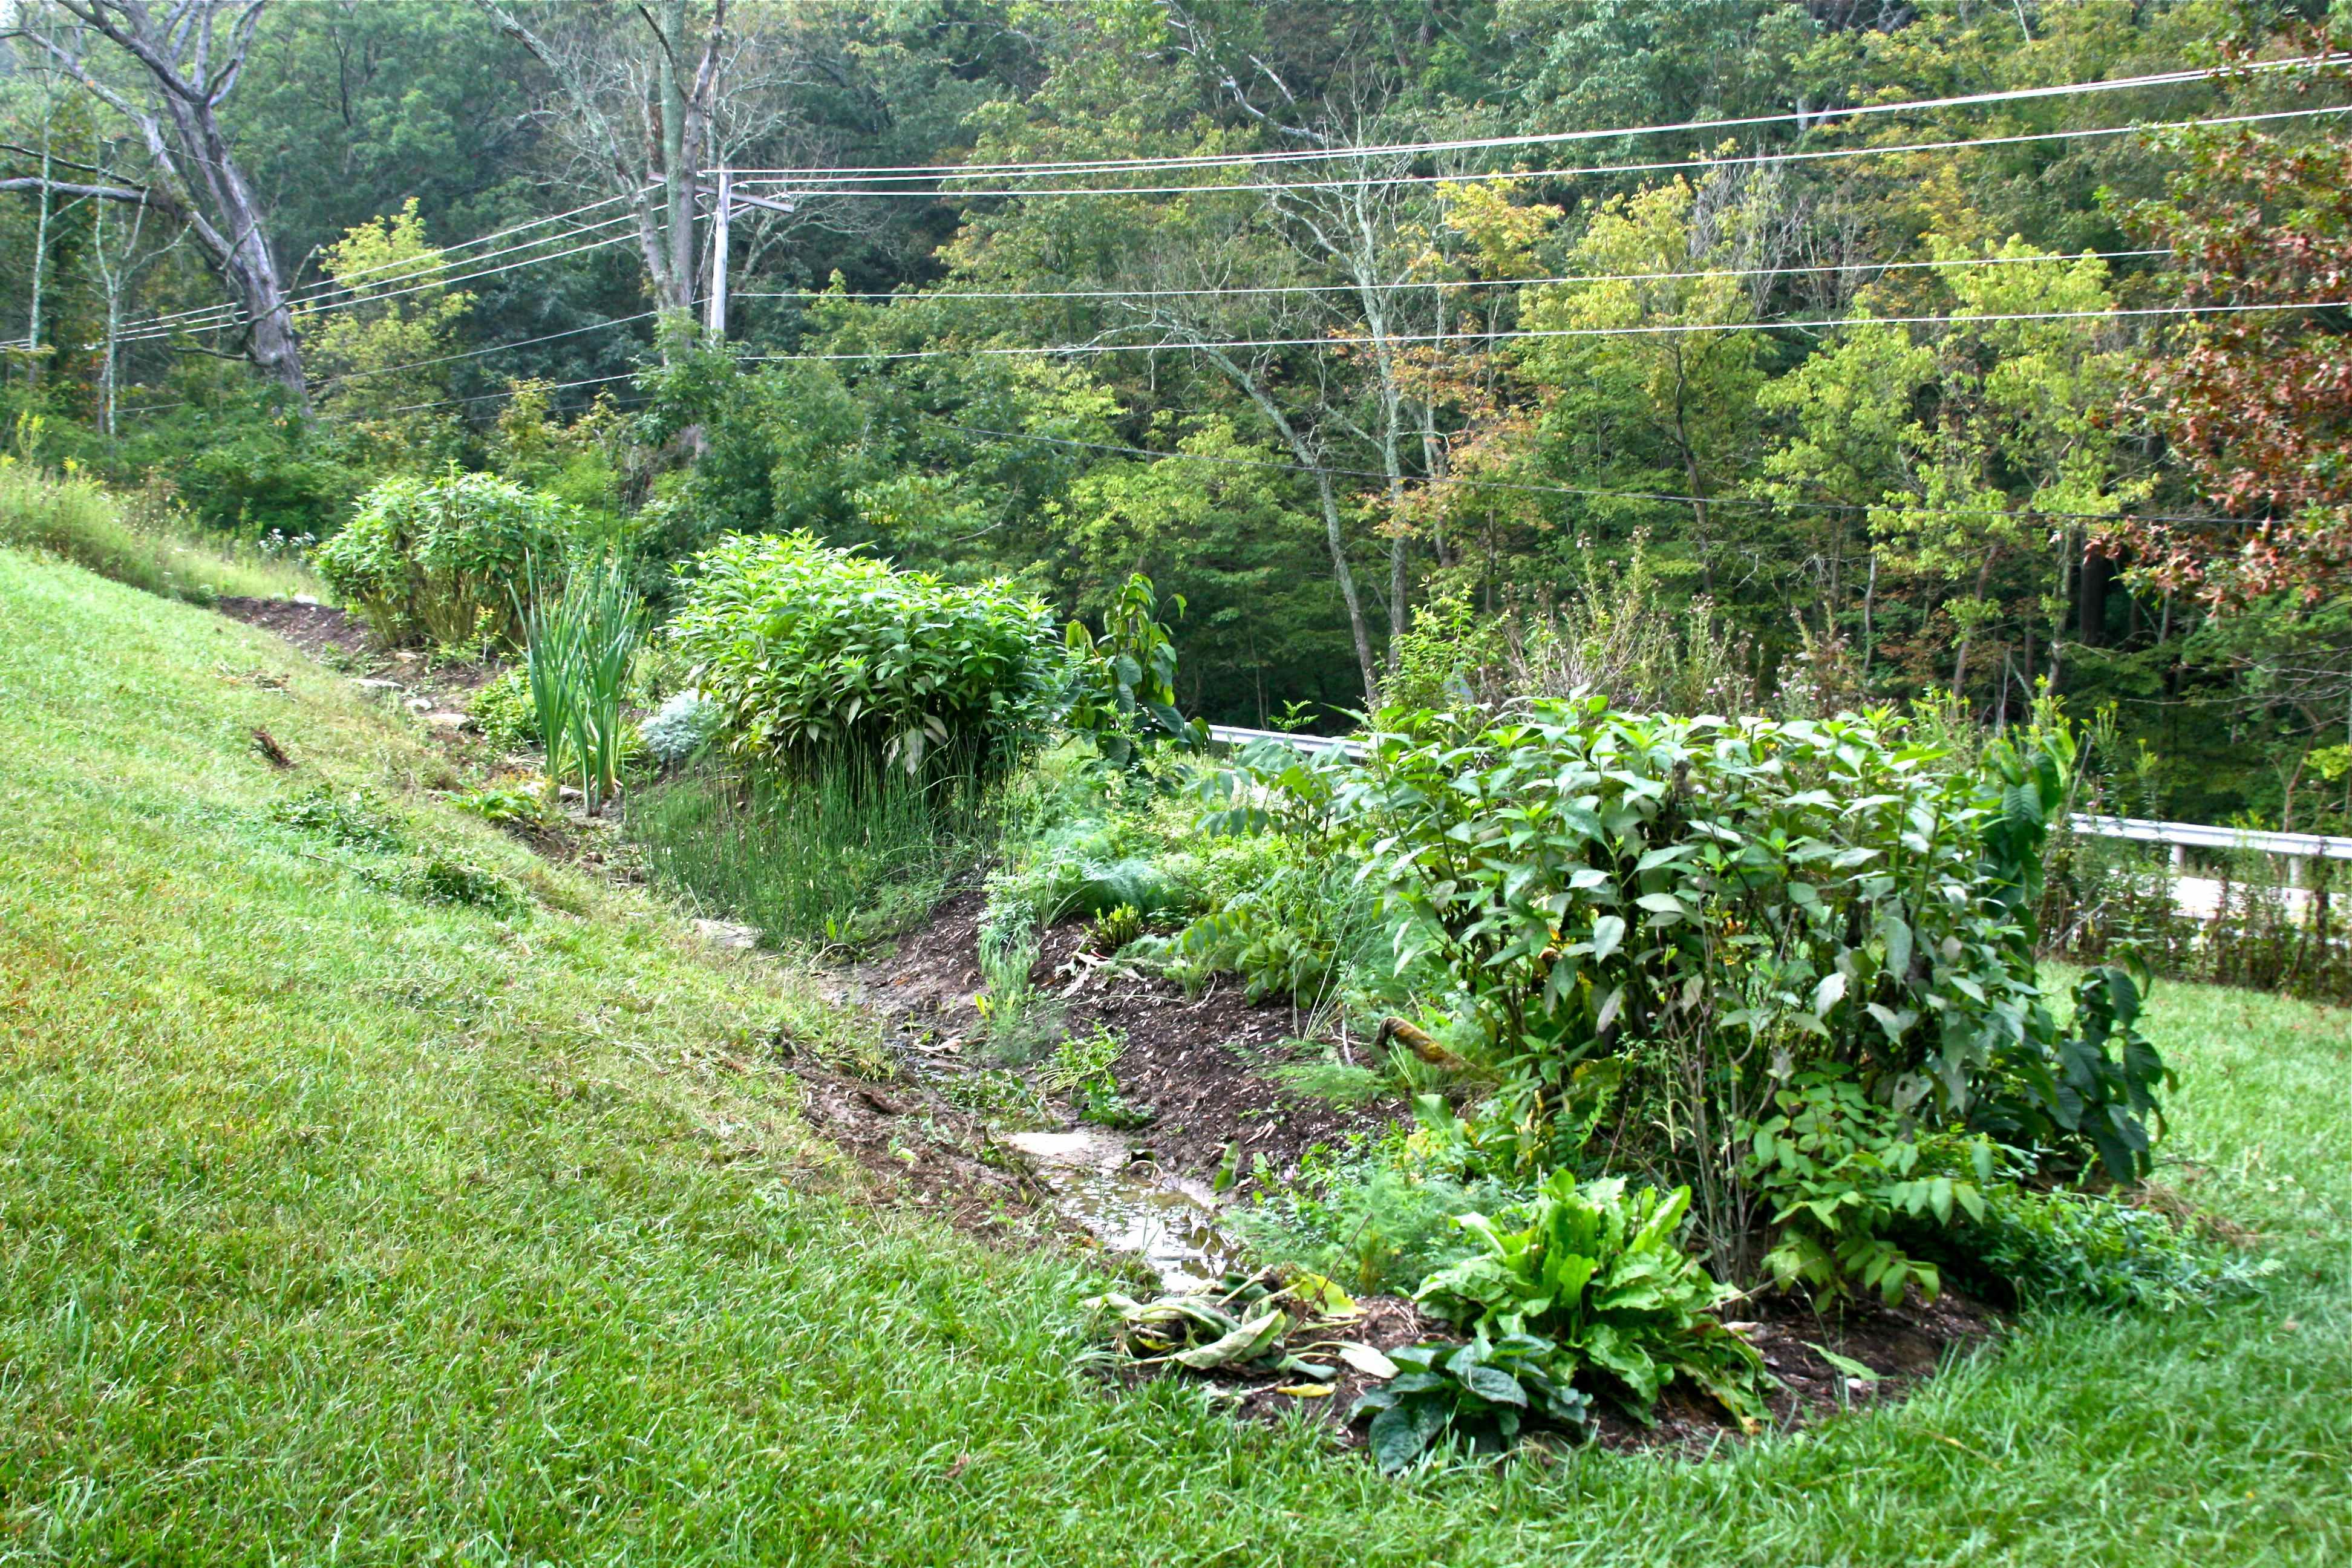 Permaculture Gardening